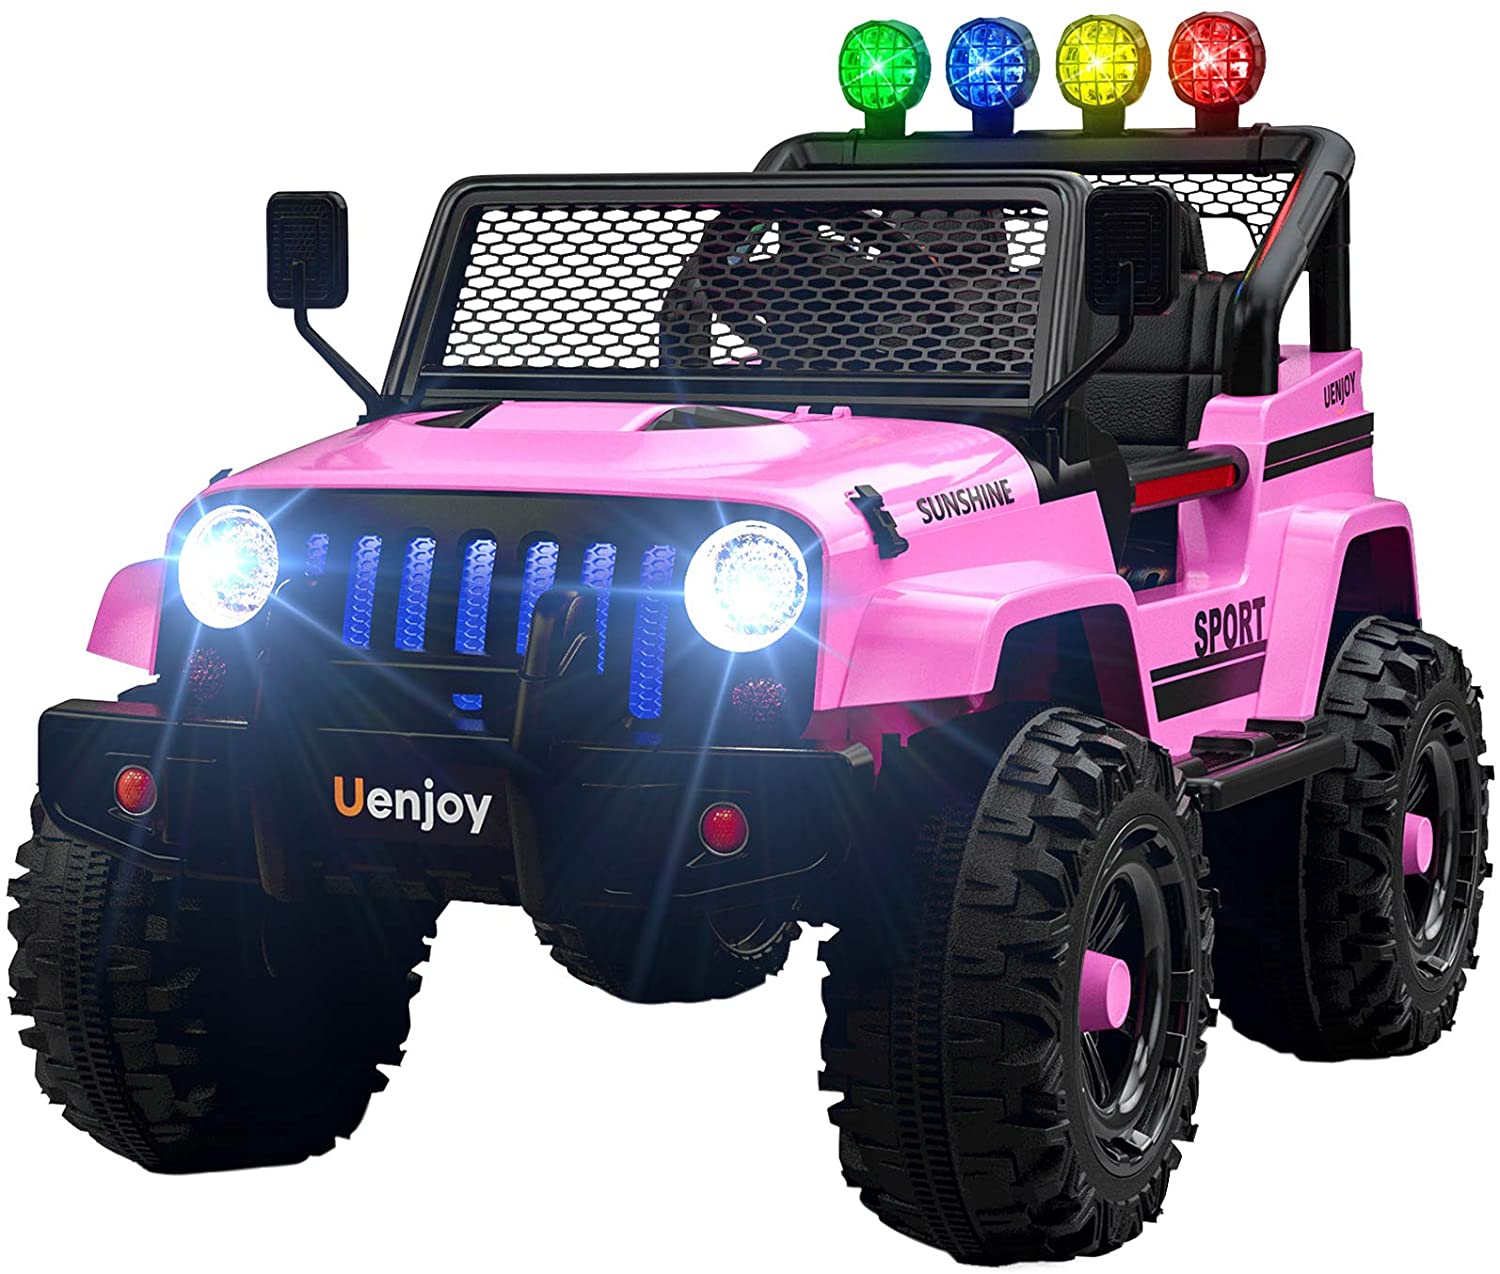 Uenjoy Kids Ride On Jeep With remote control - Pink